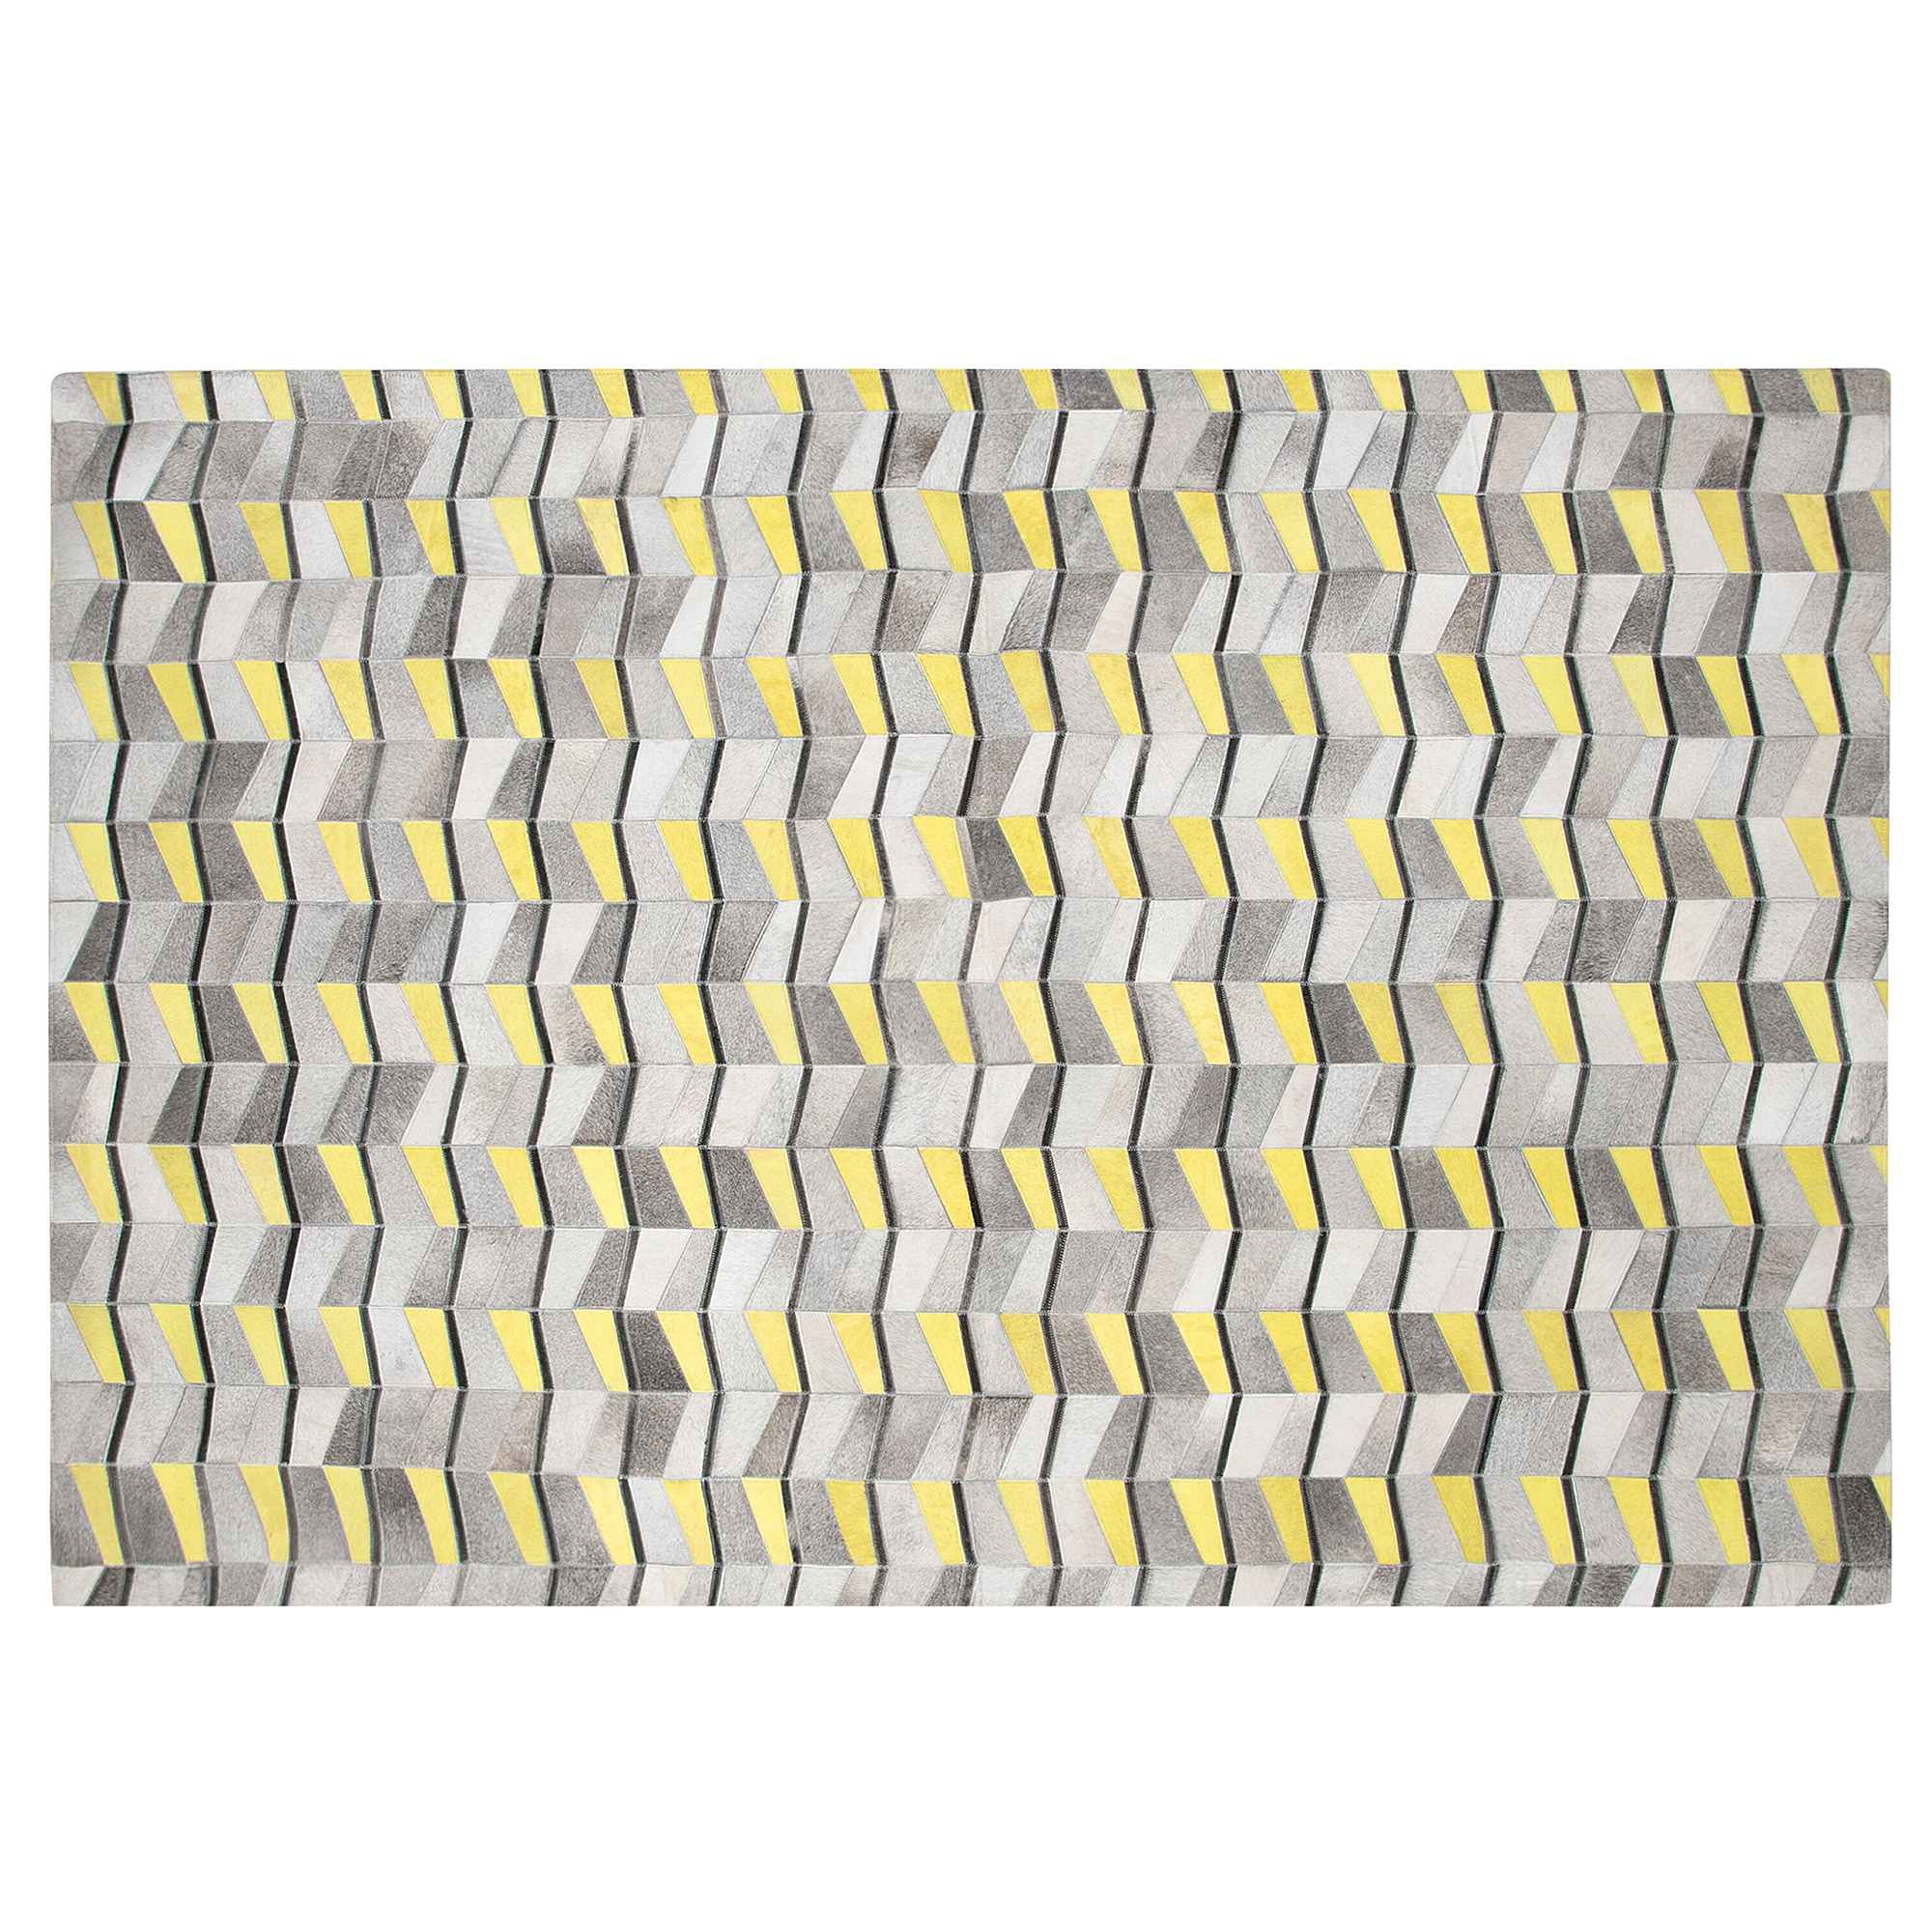 Beliani Area Rug Grey with Yellow Leather 140 x 200 cm Rectangular Patchwork Handcrafted